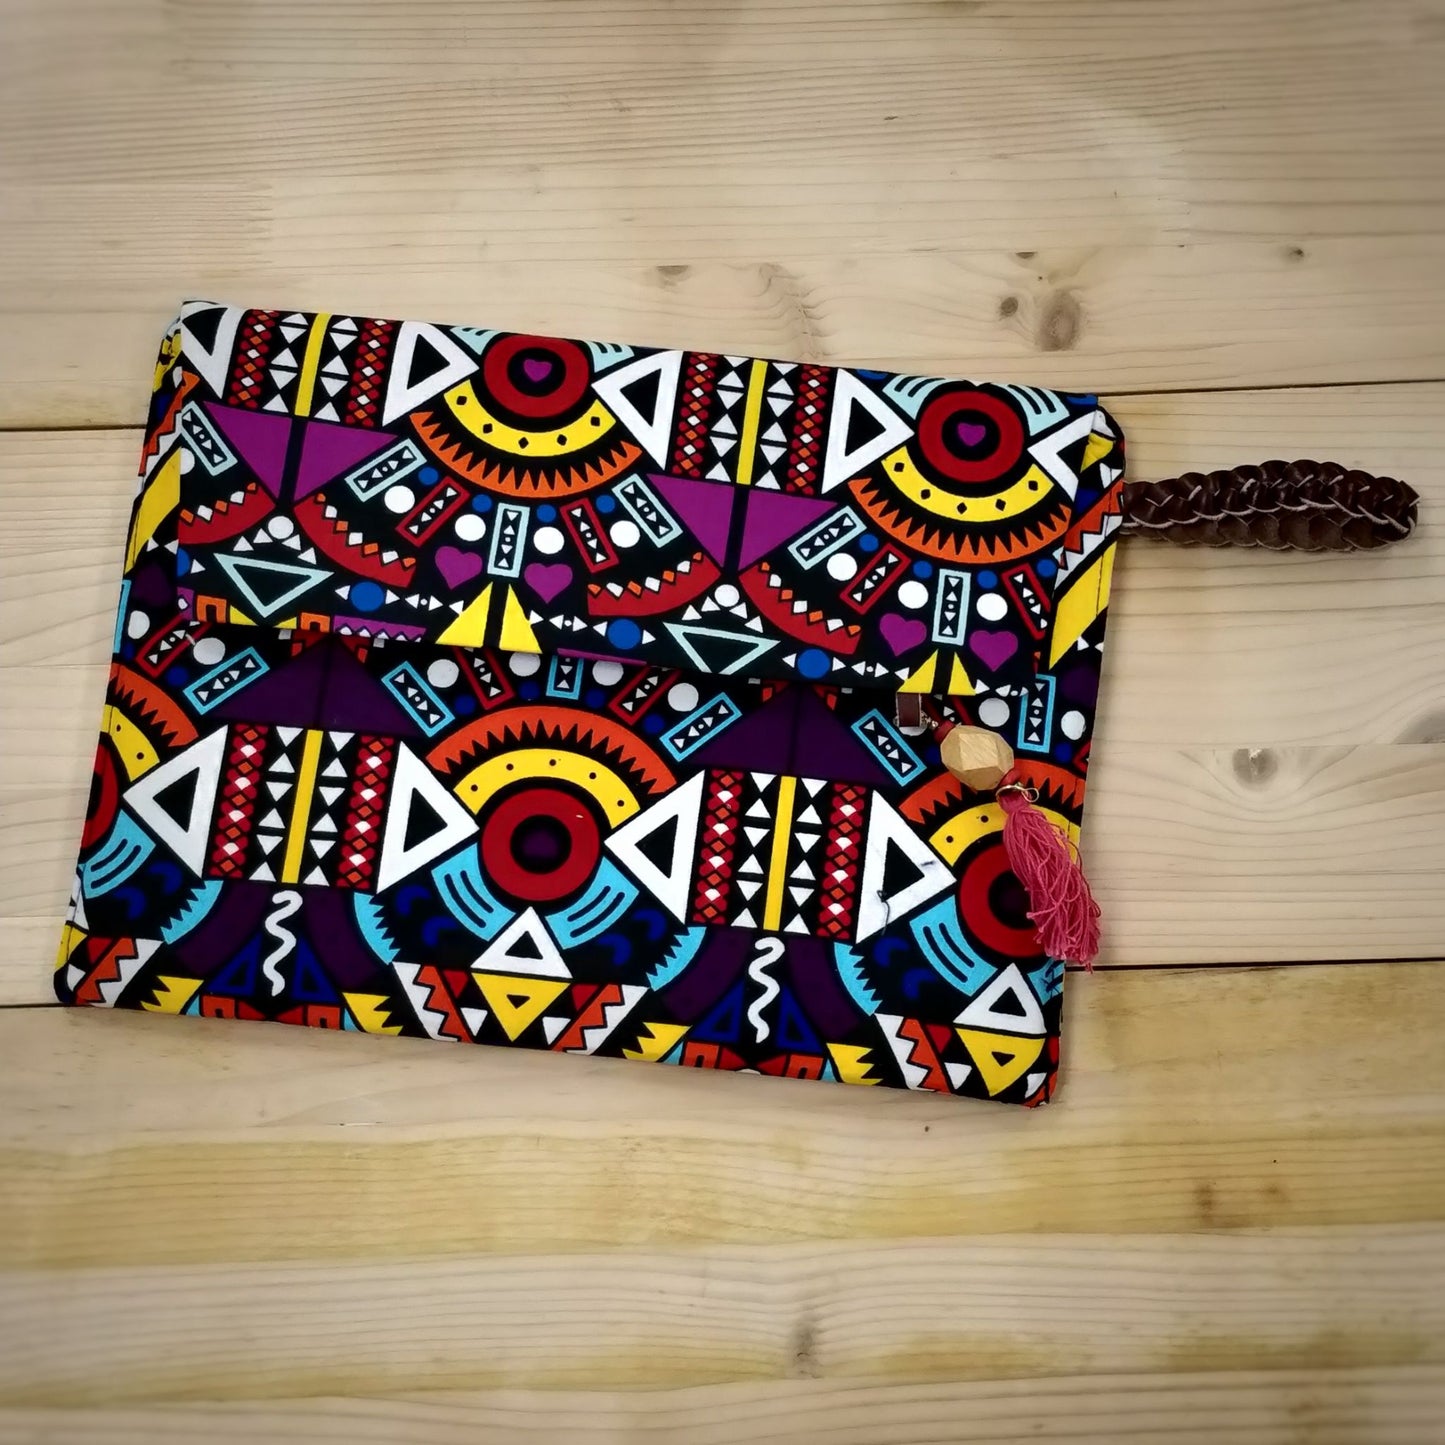 Fabric-Bound Tablet Case | Handmade and Fair Trade padded table cover